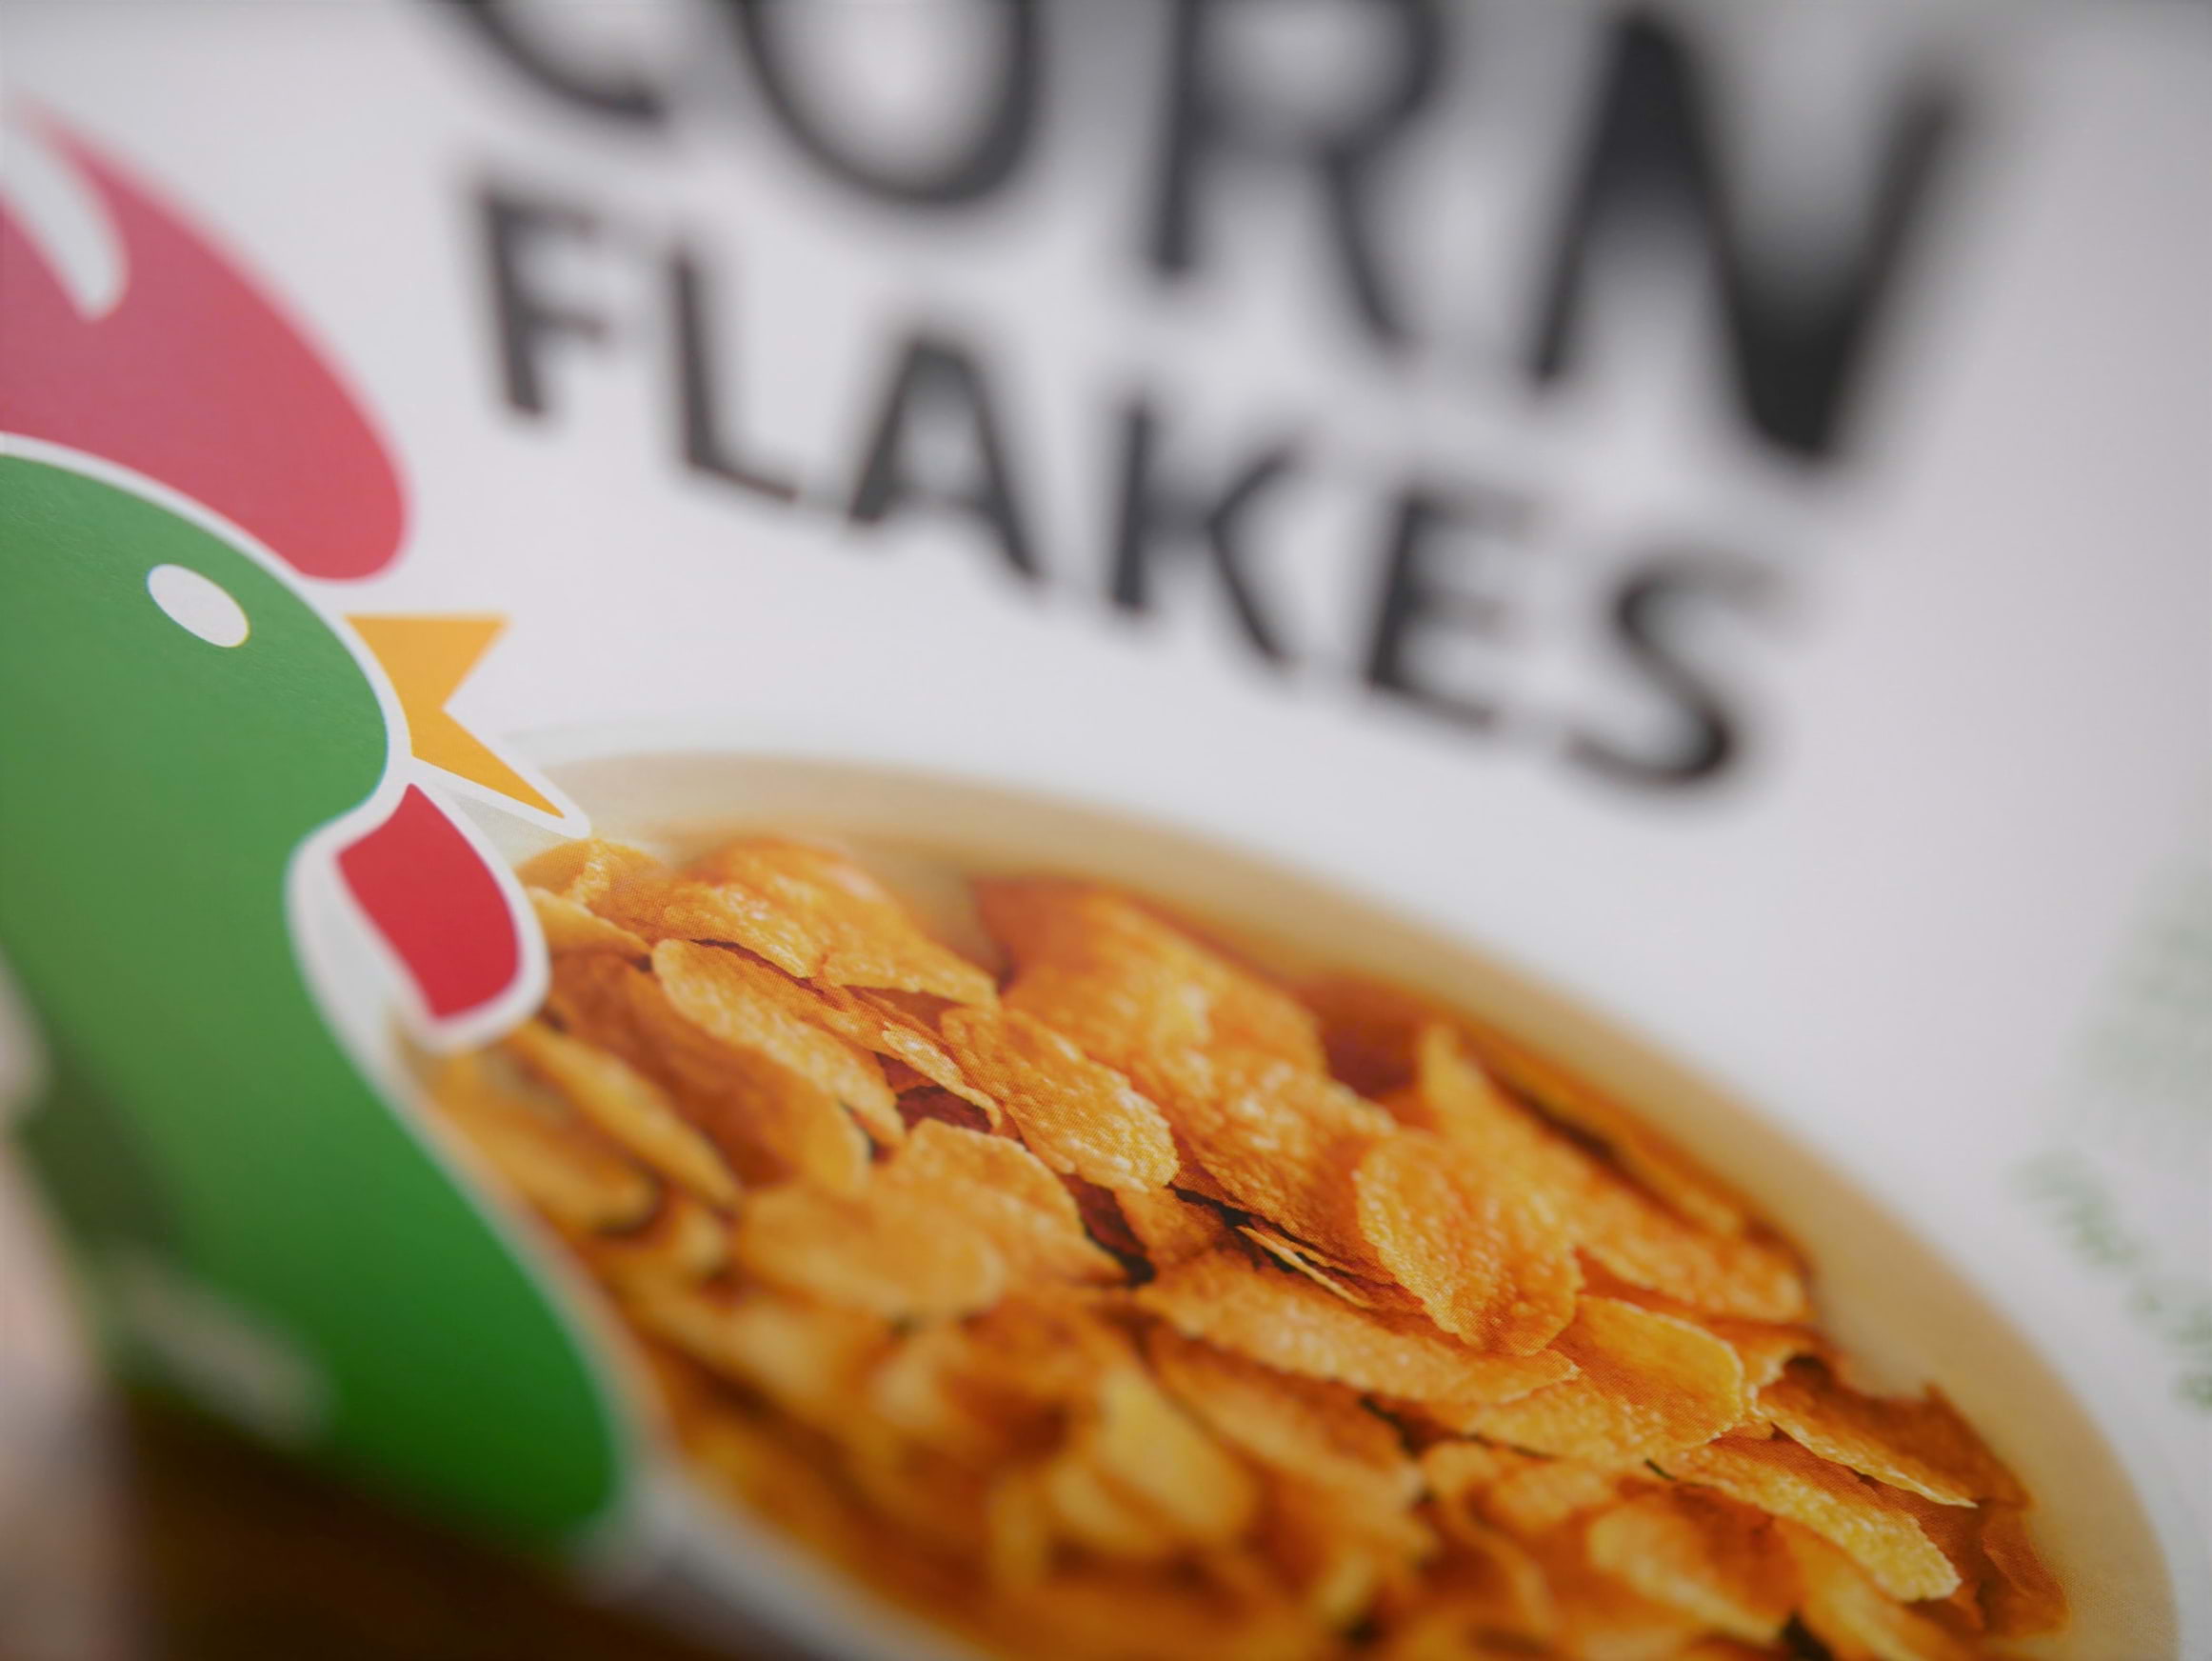 Craft your perfect cereal bowl at this Kellogg's pop-up